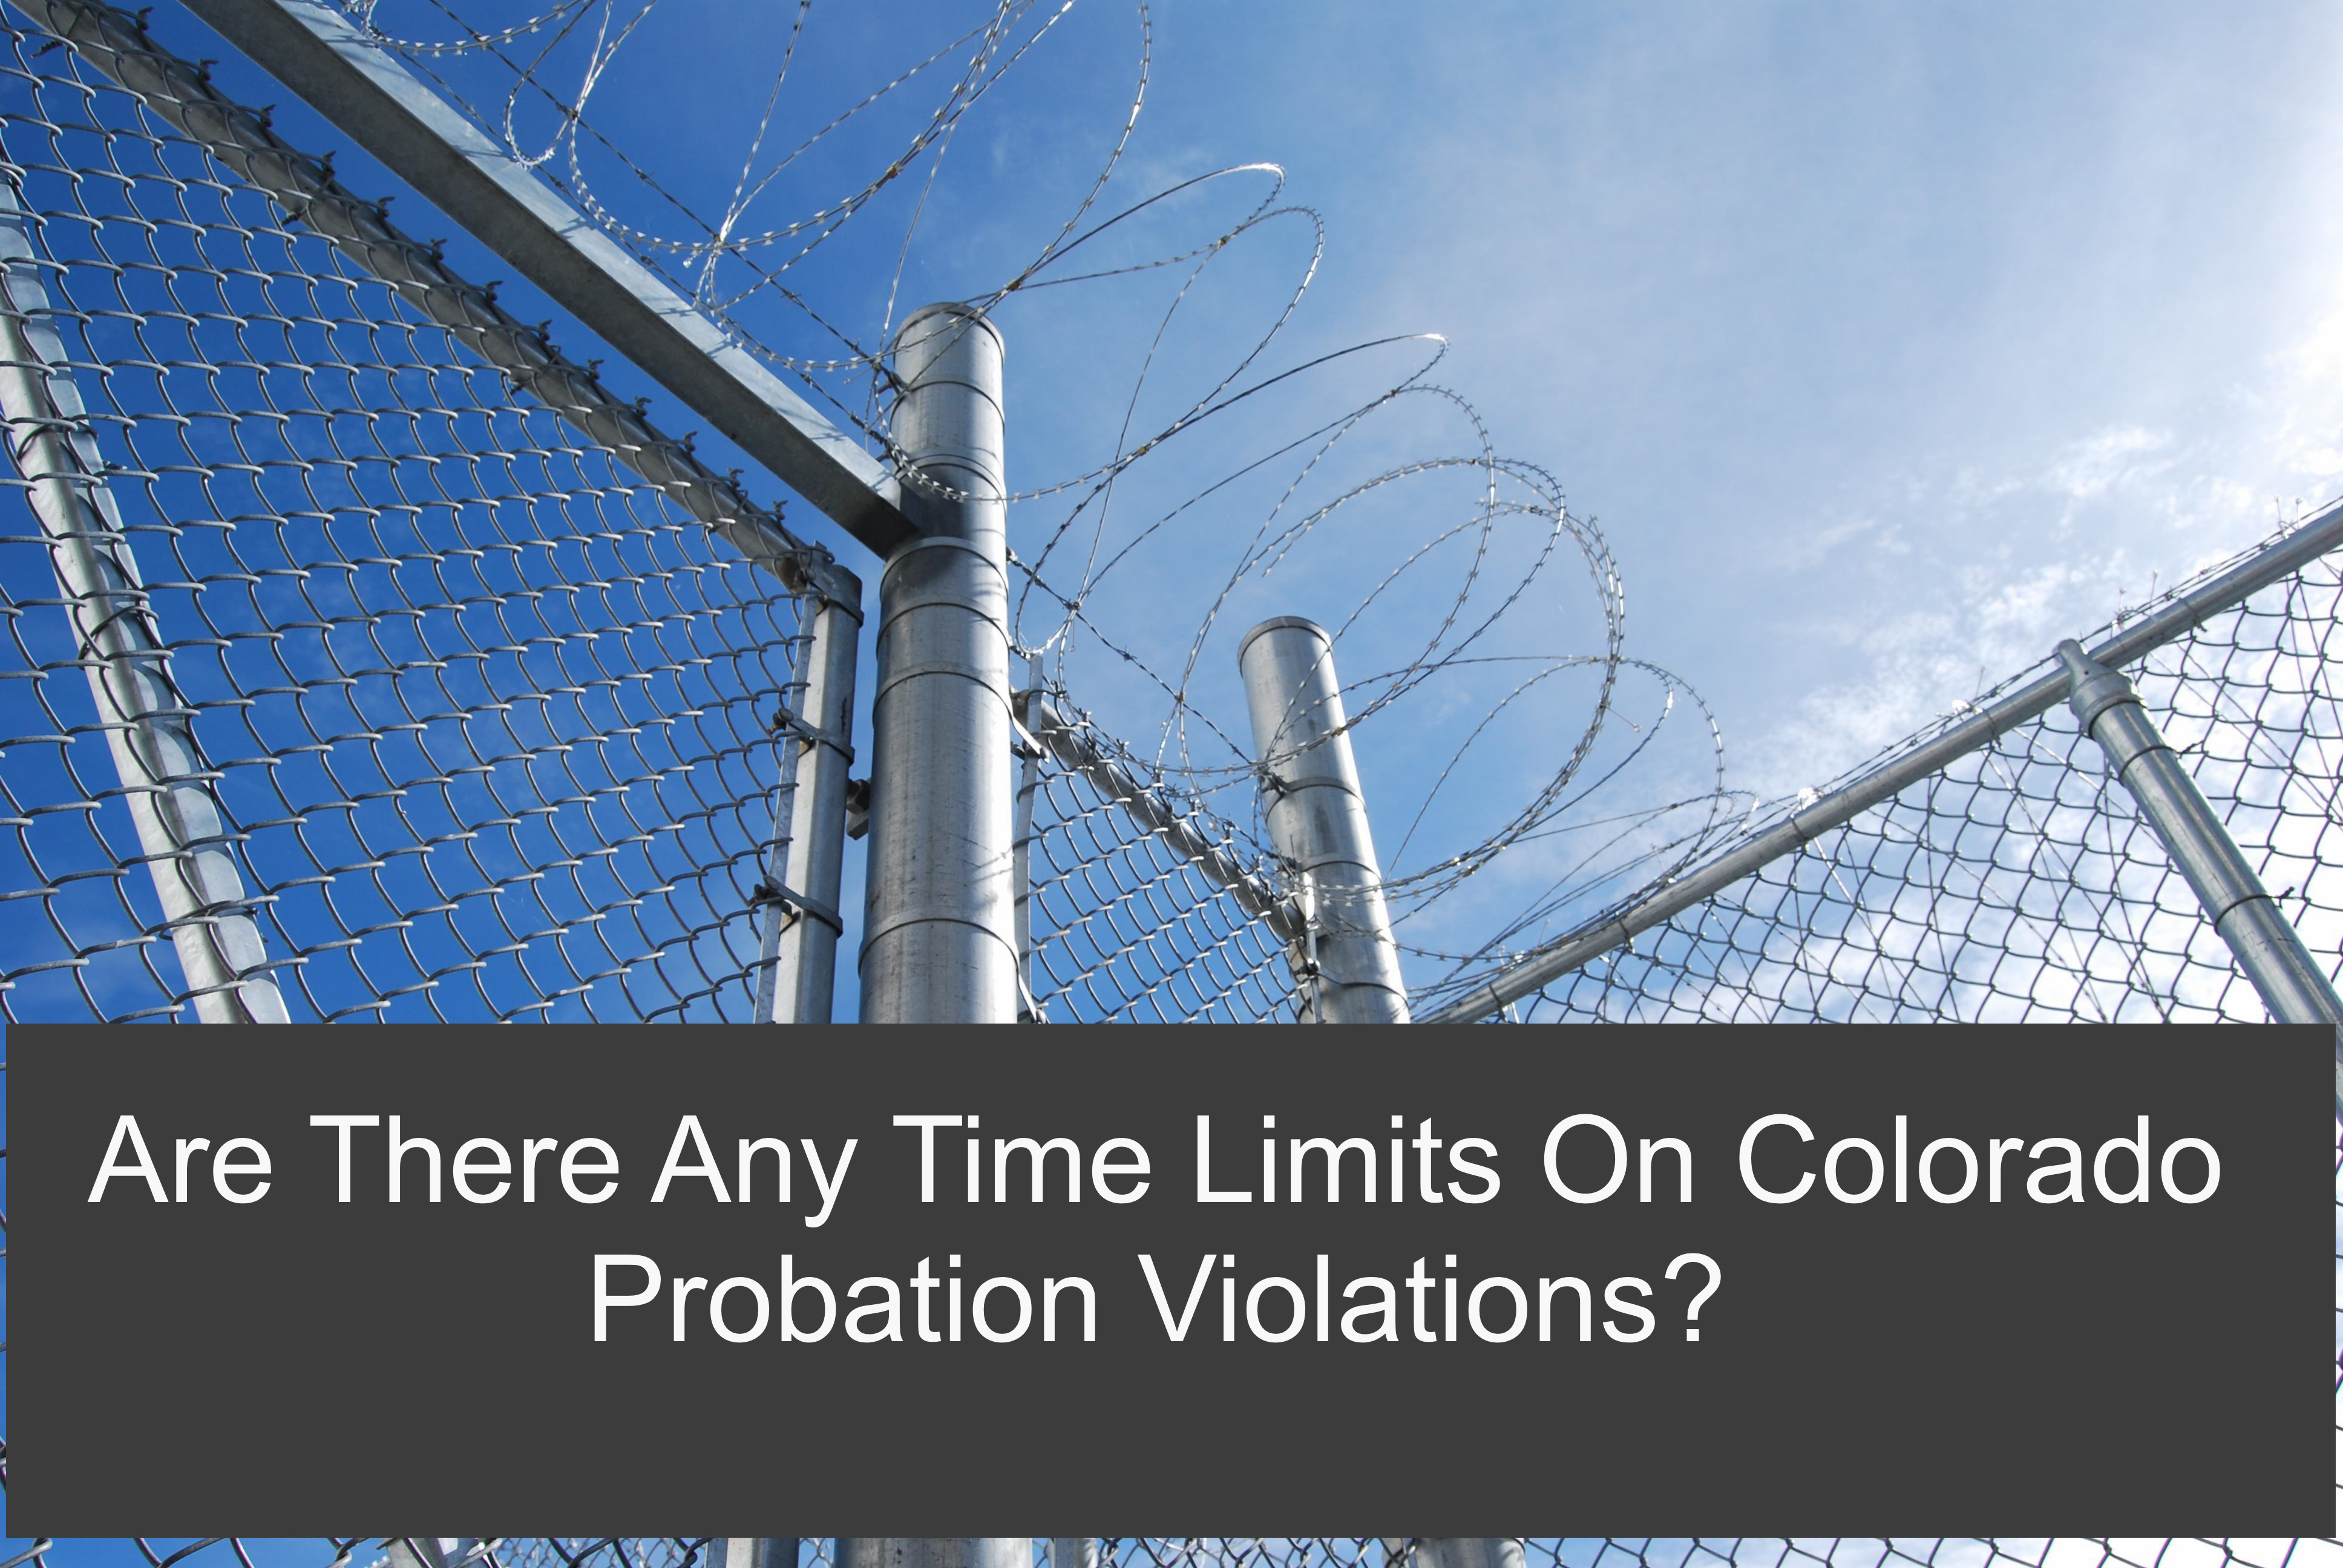 Are There Any Time Limits On Colorado Probation Violations?